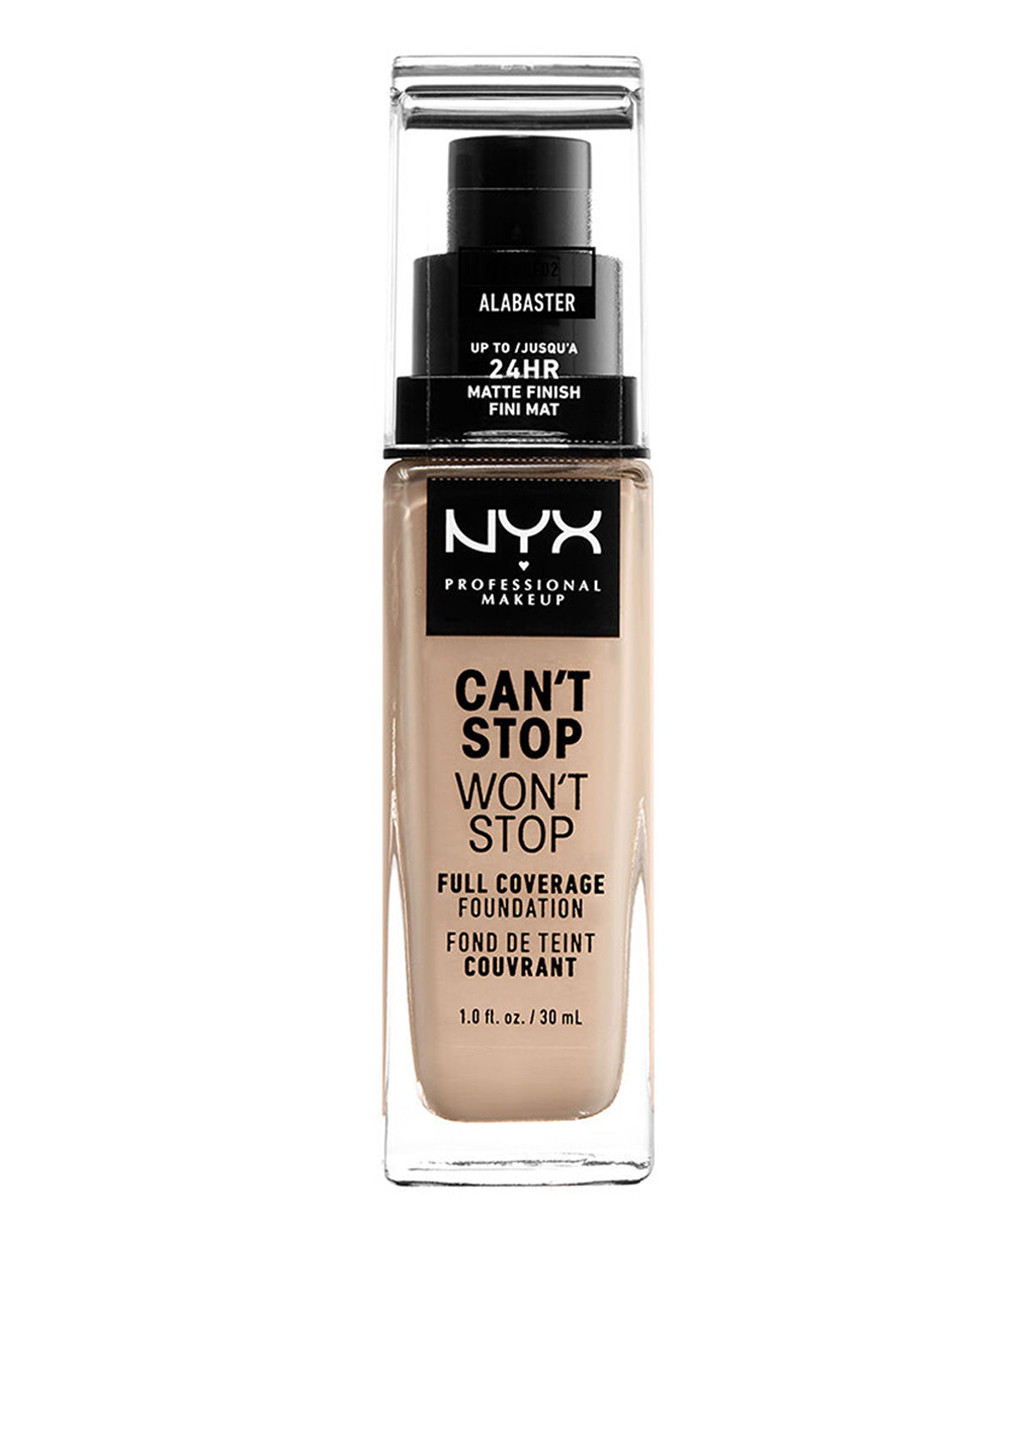 Тональная основа Can't Stop Won't Stop Full Coverage Foundation 02 Alabaster, 30 мл NYX Professional Makeup (202410426)